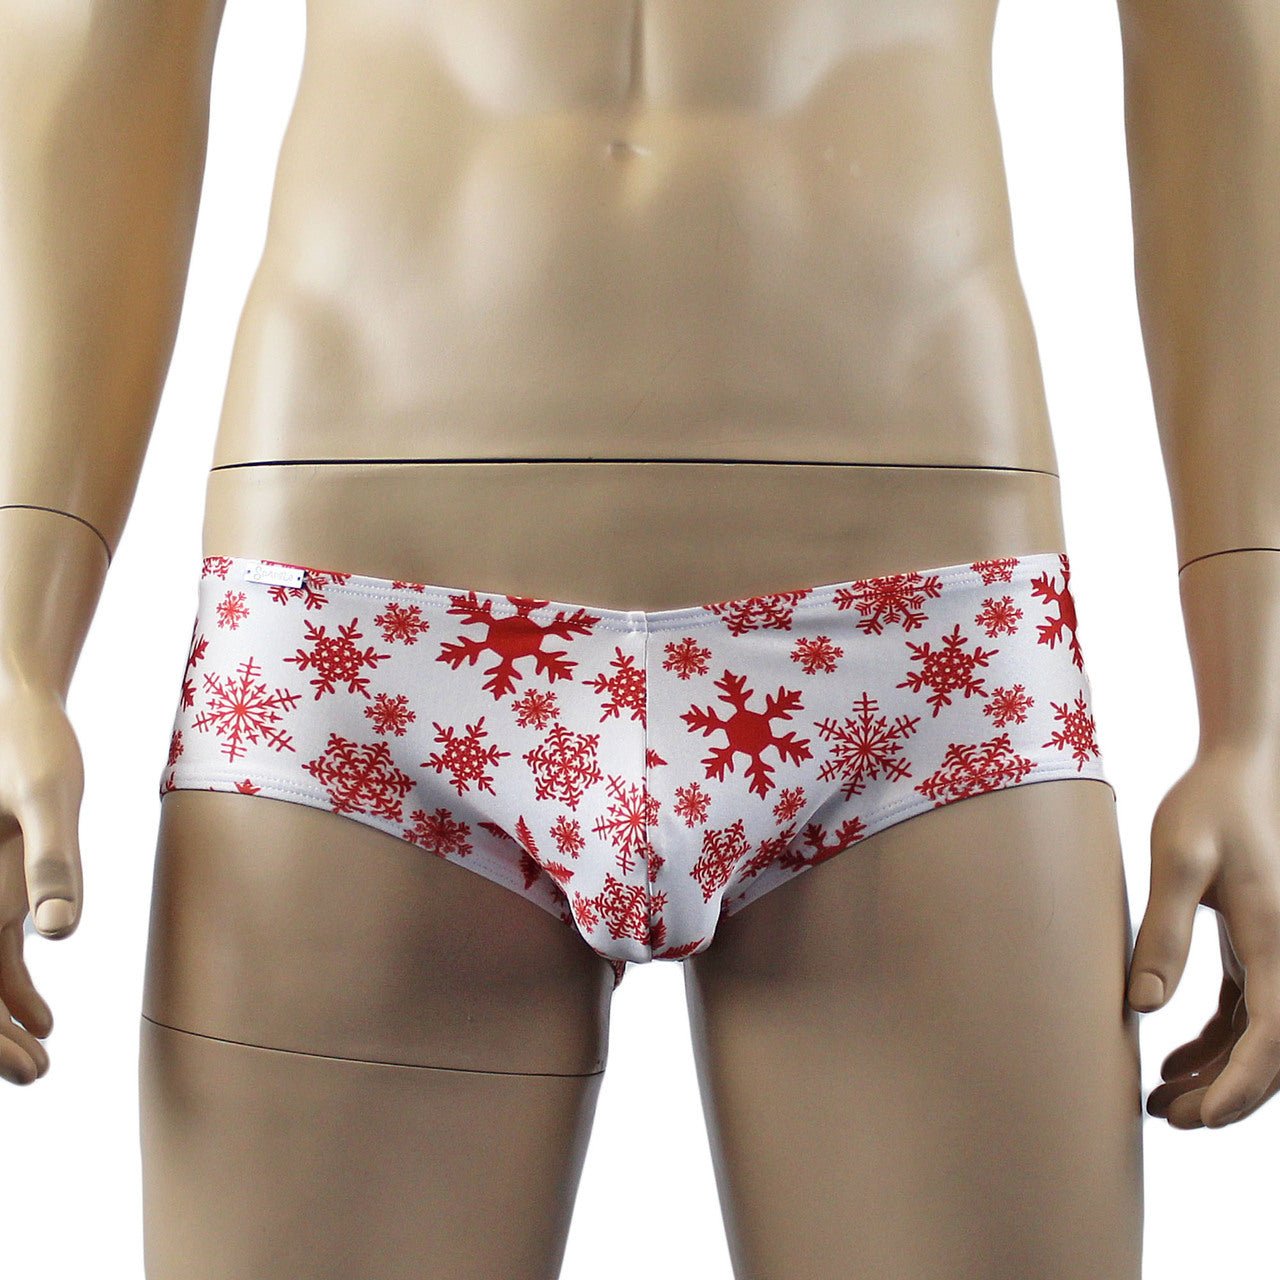 SALE - XMAS GIFT - Mens Christmas Diamond Printed Boxer Shorts with  Decorated Pouch Front Black and White